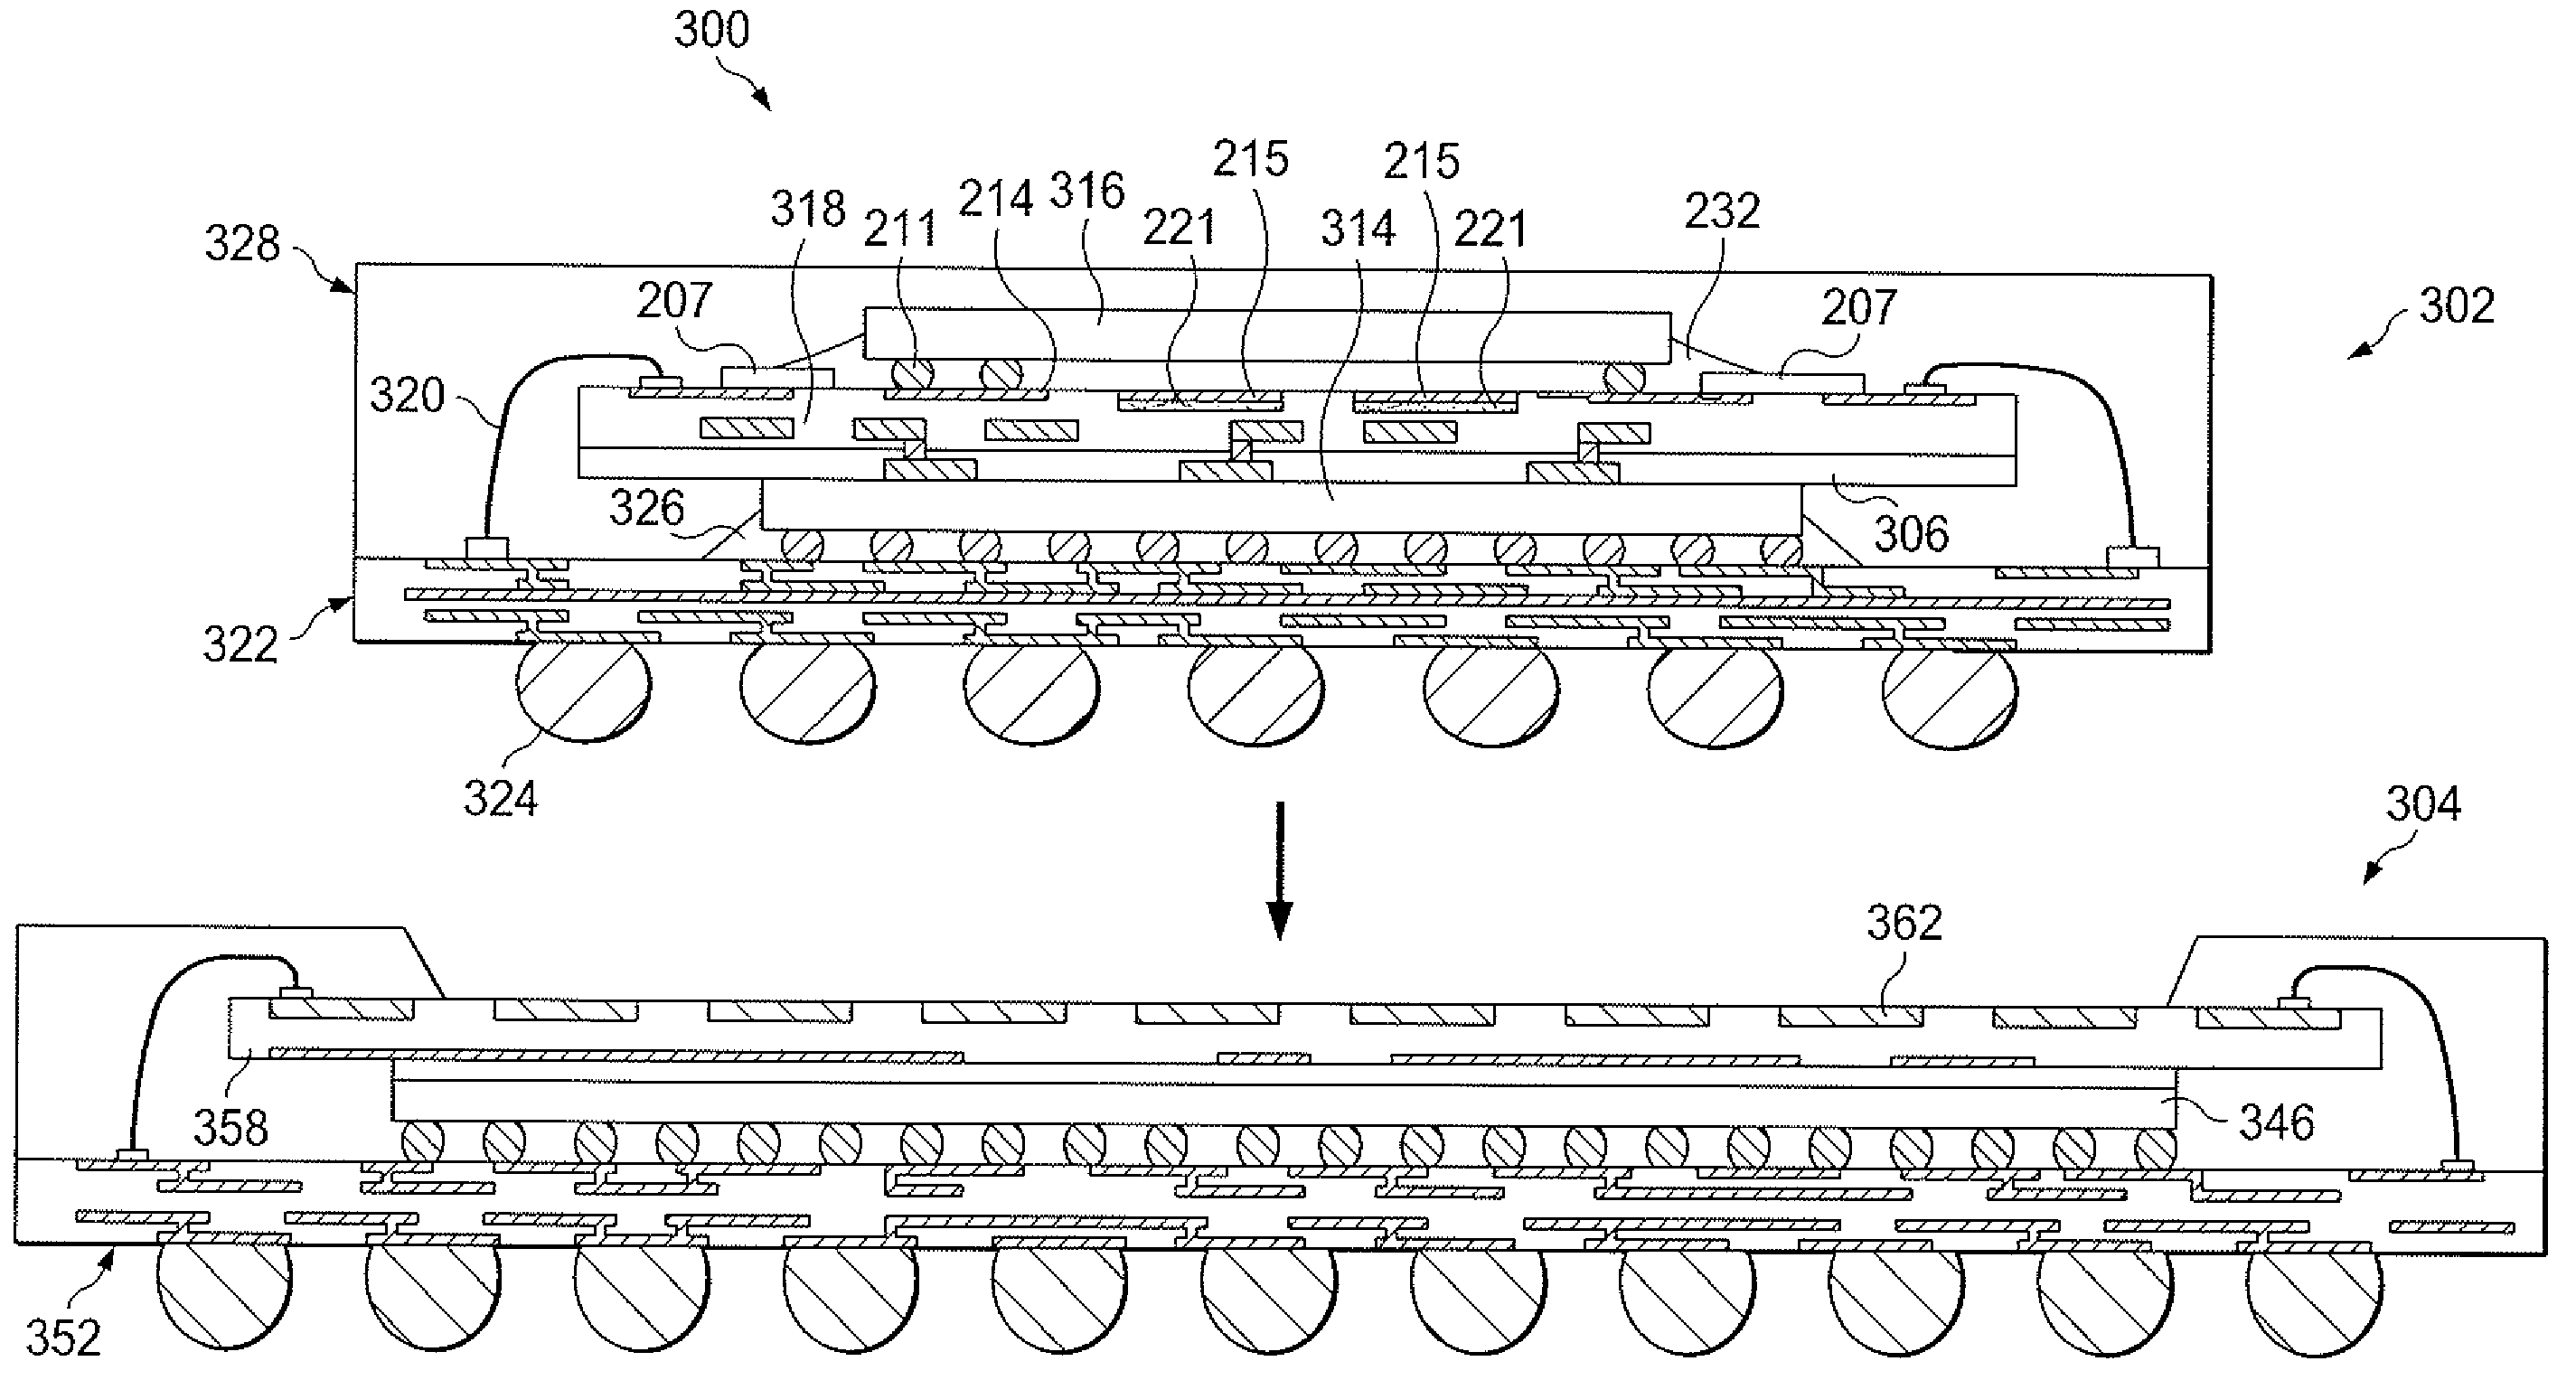 Flip chip semiconductor device having workpiece adhesion promoter layer for improved underfill adhesion